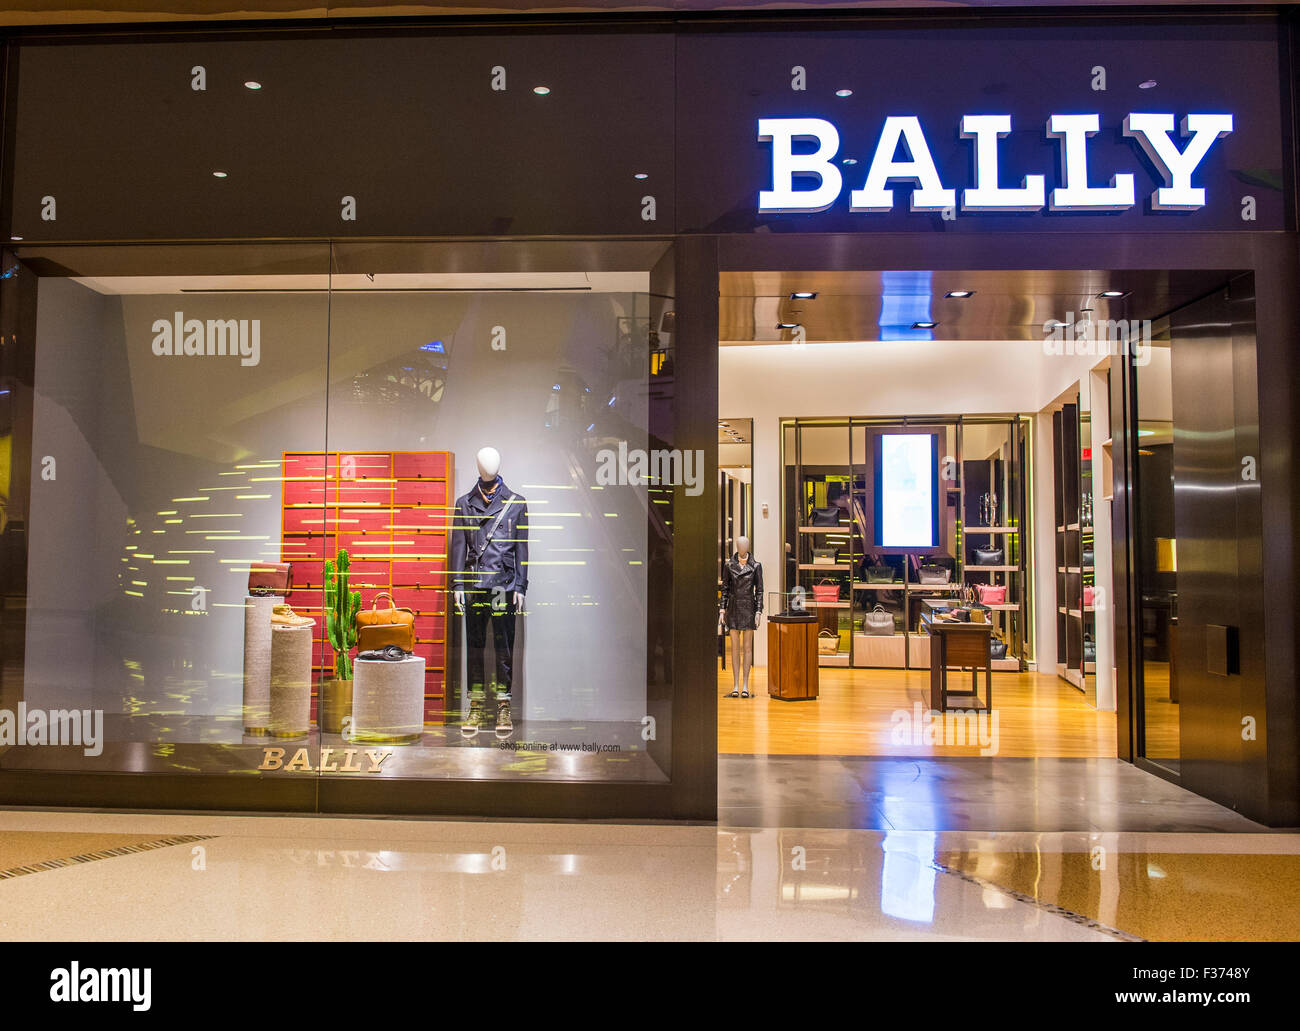 Bally Store High Resolution Stock Photography and Images - Alamy